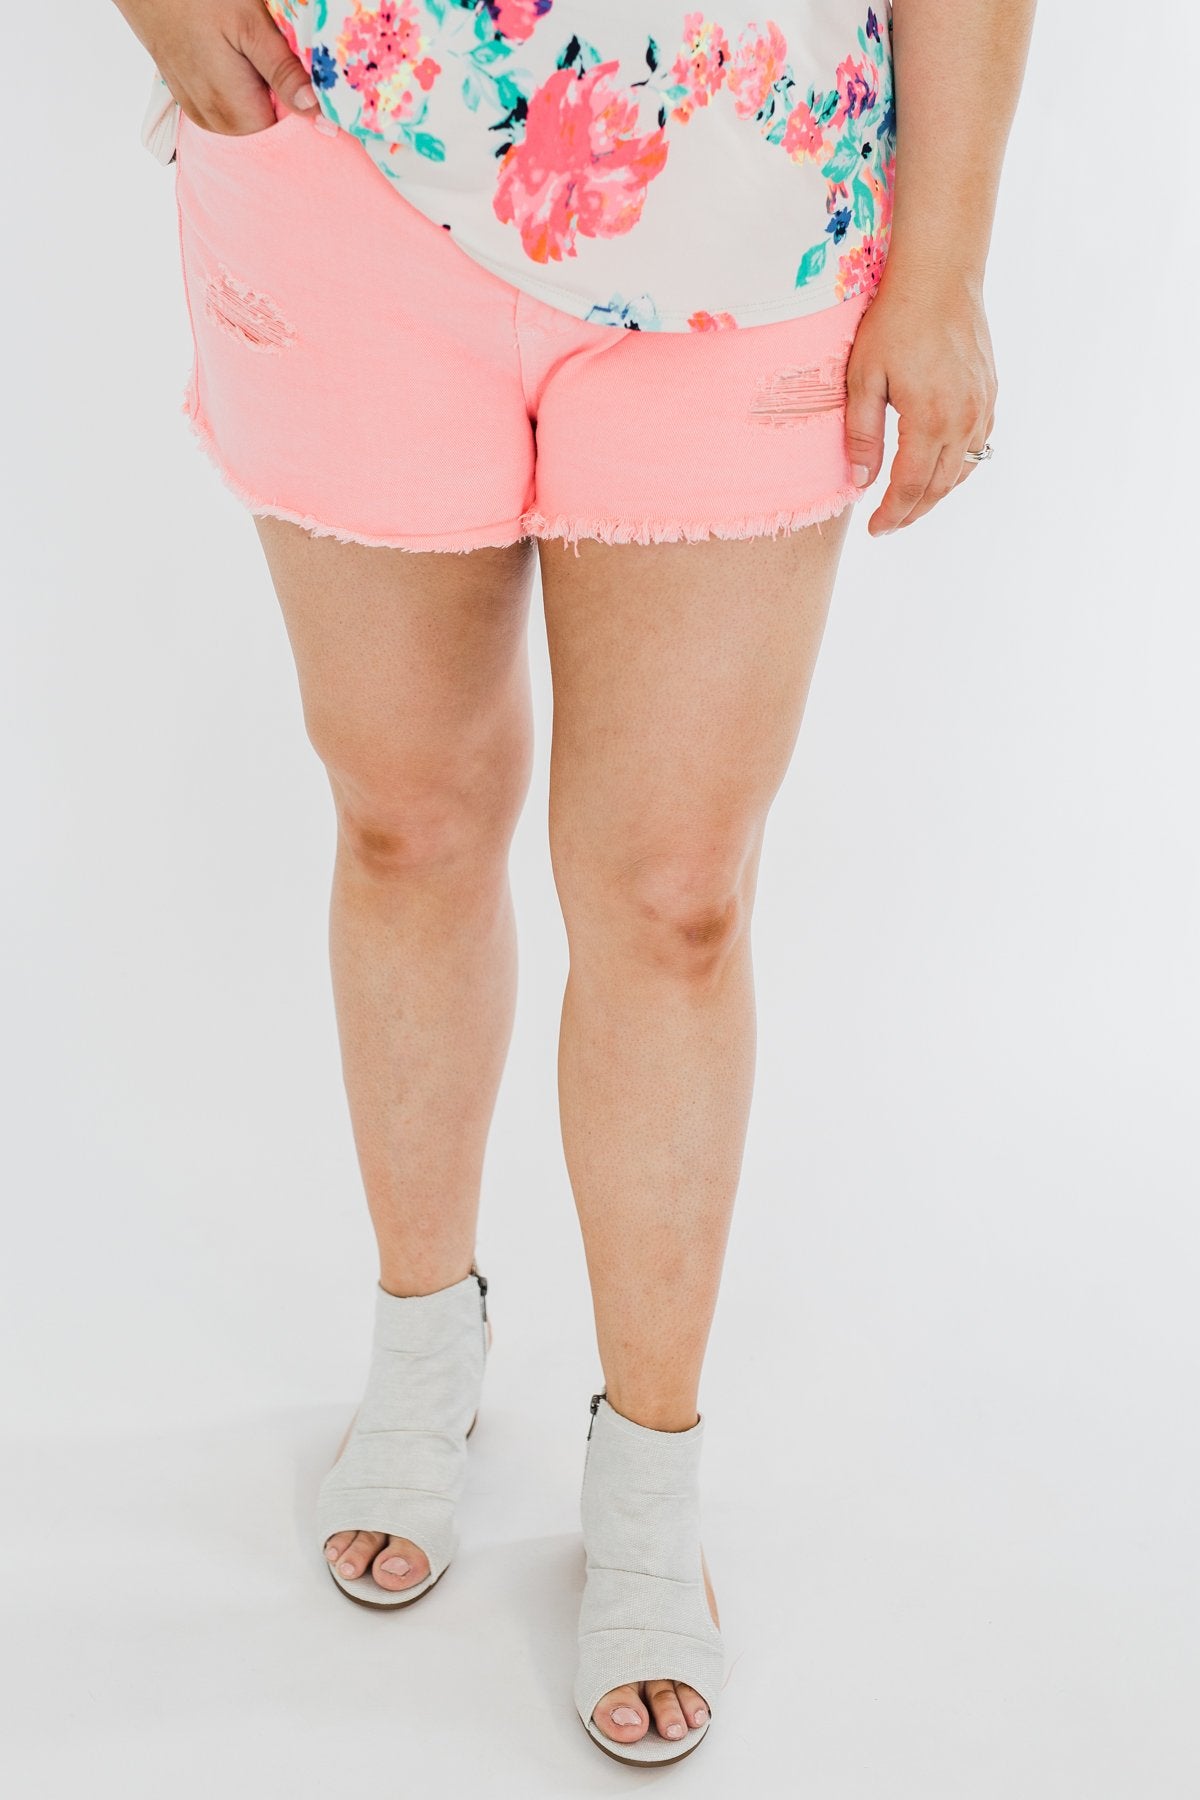 YMI Distressed Colored Shorts- Neon Pink